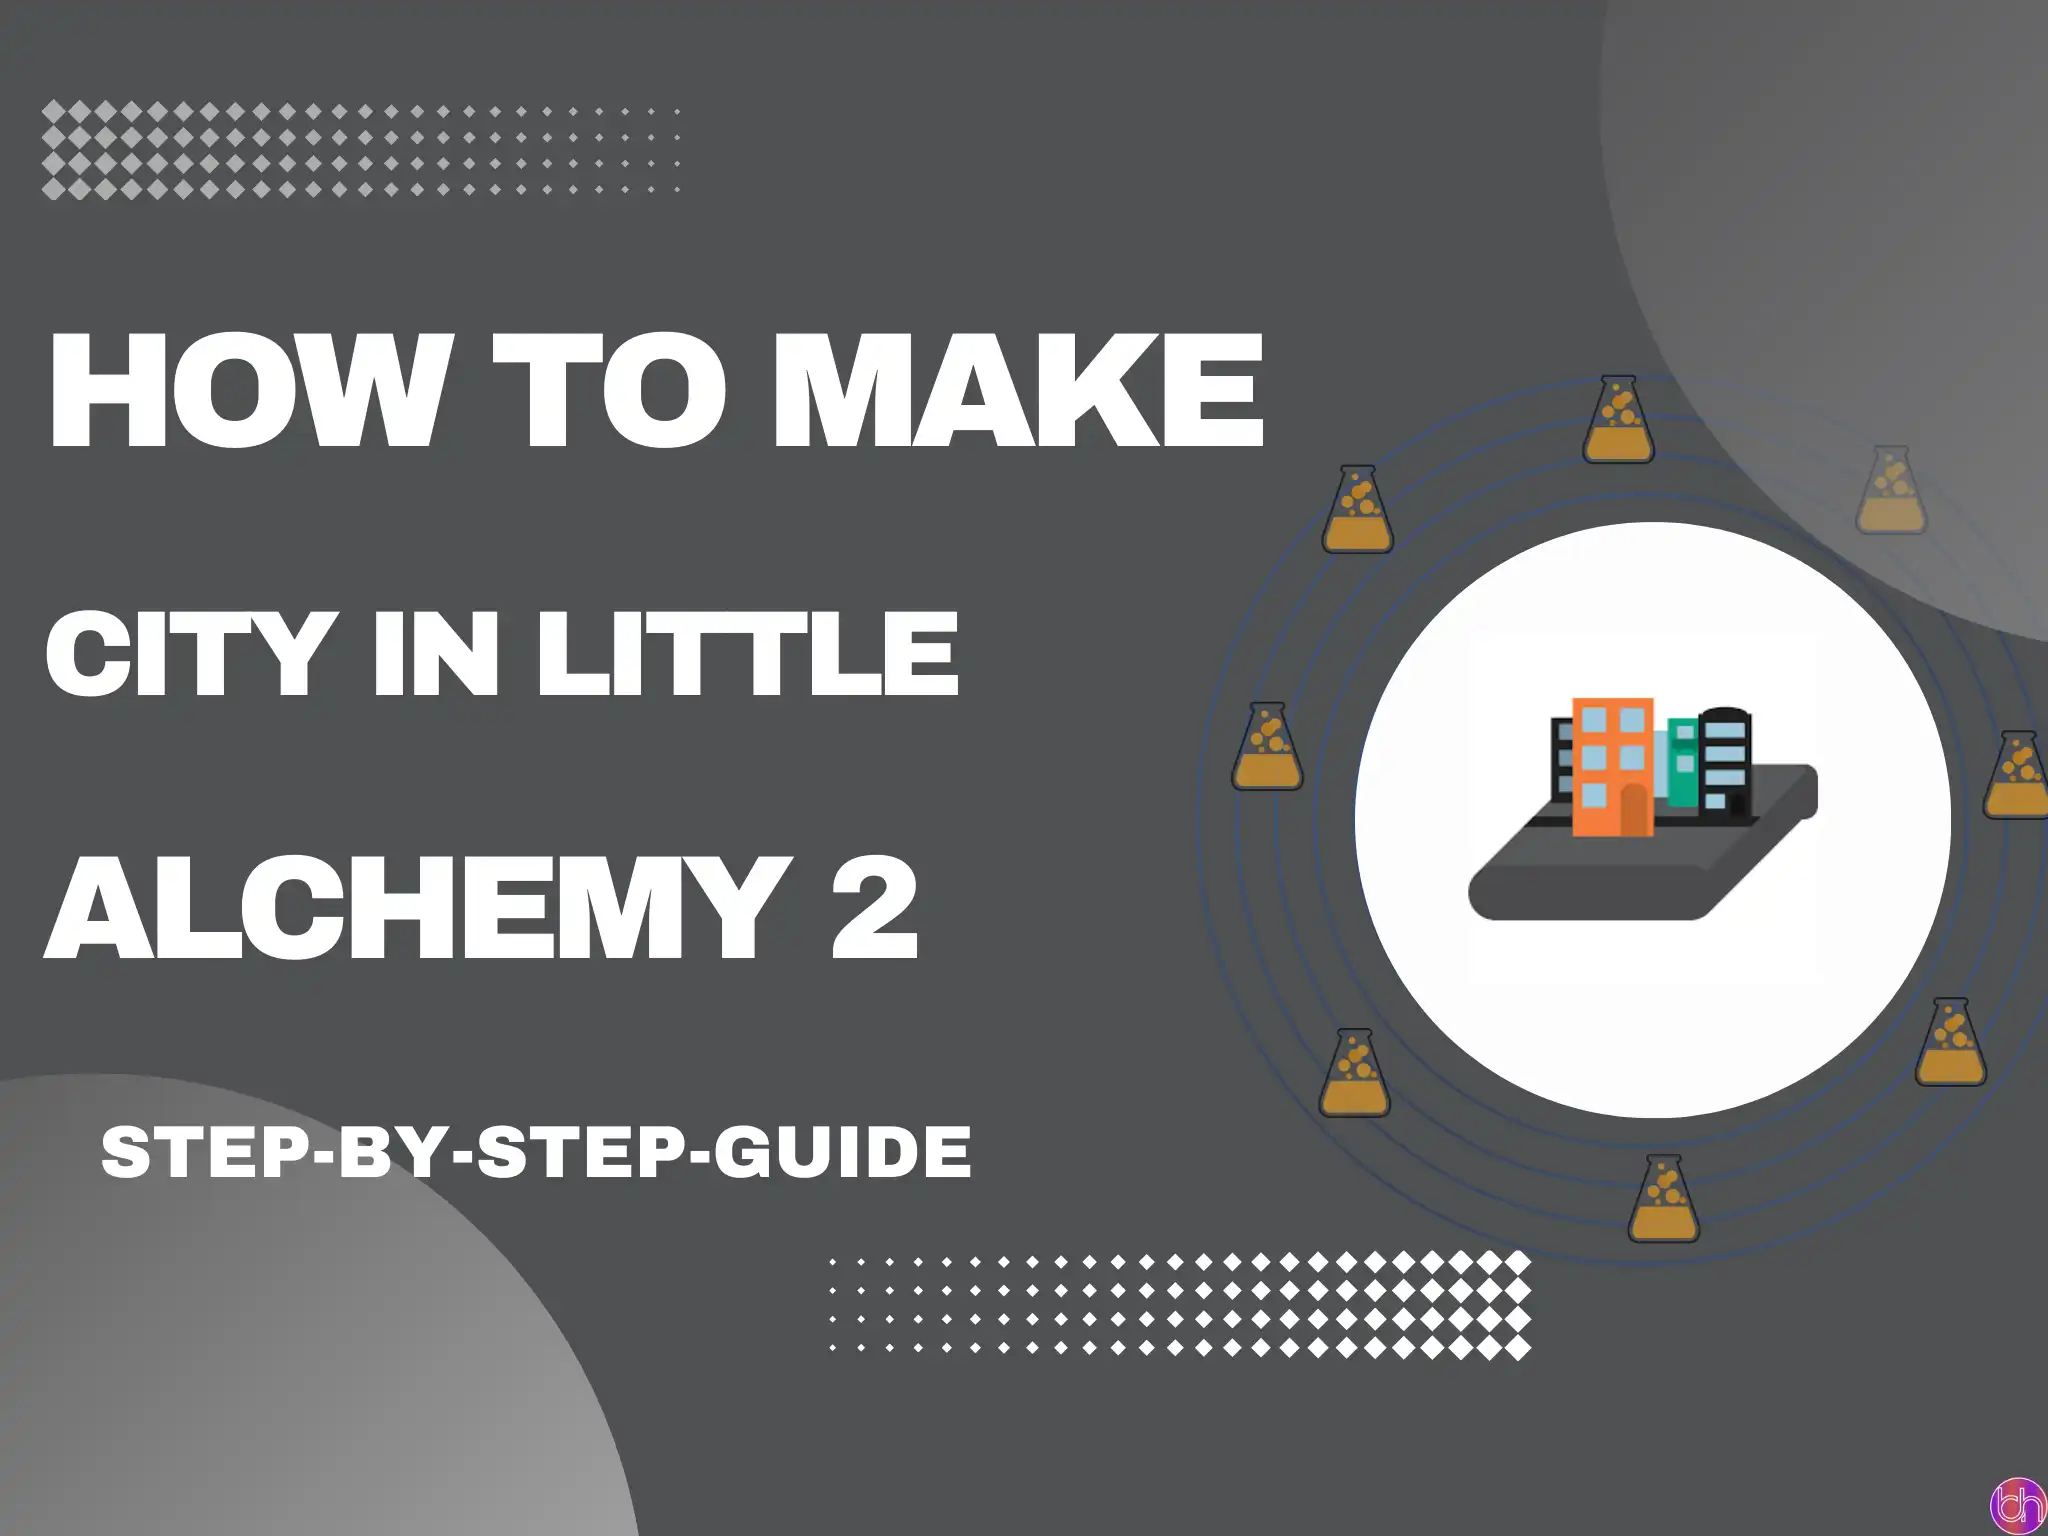 How to make City in Little Alchemy 2